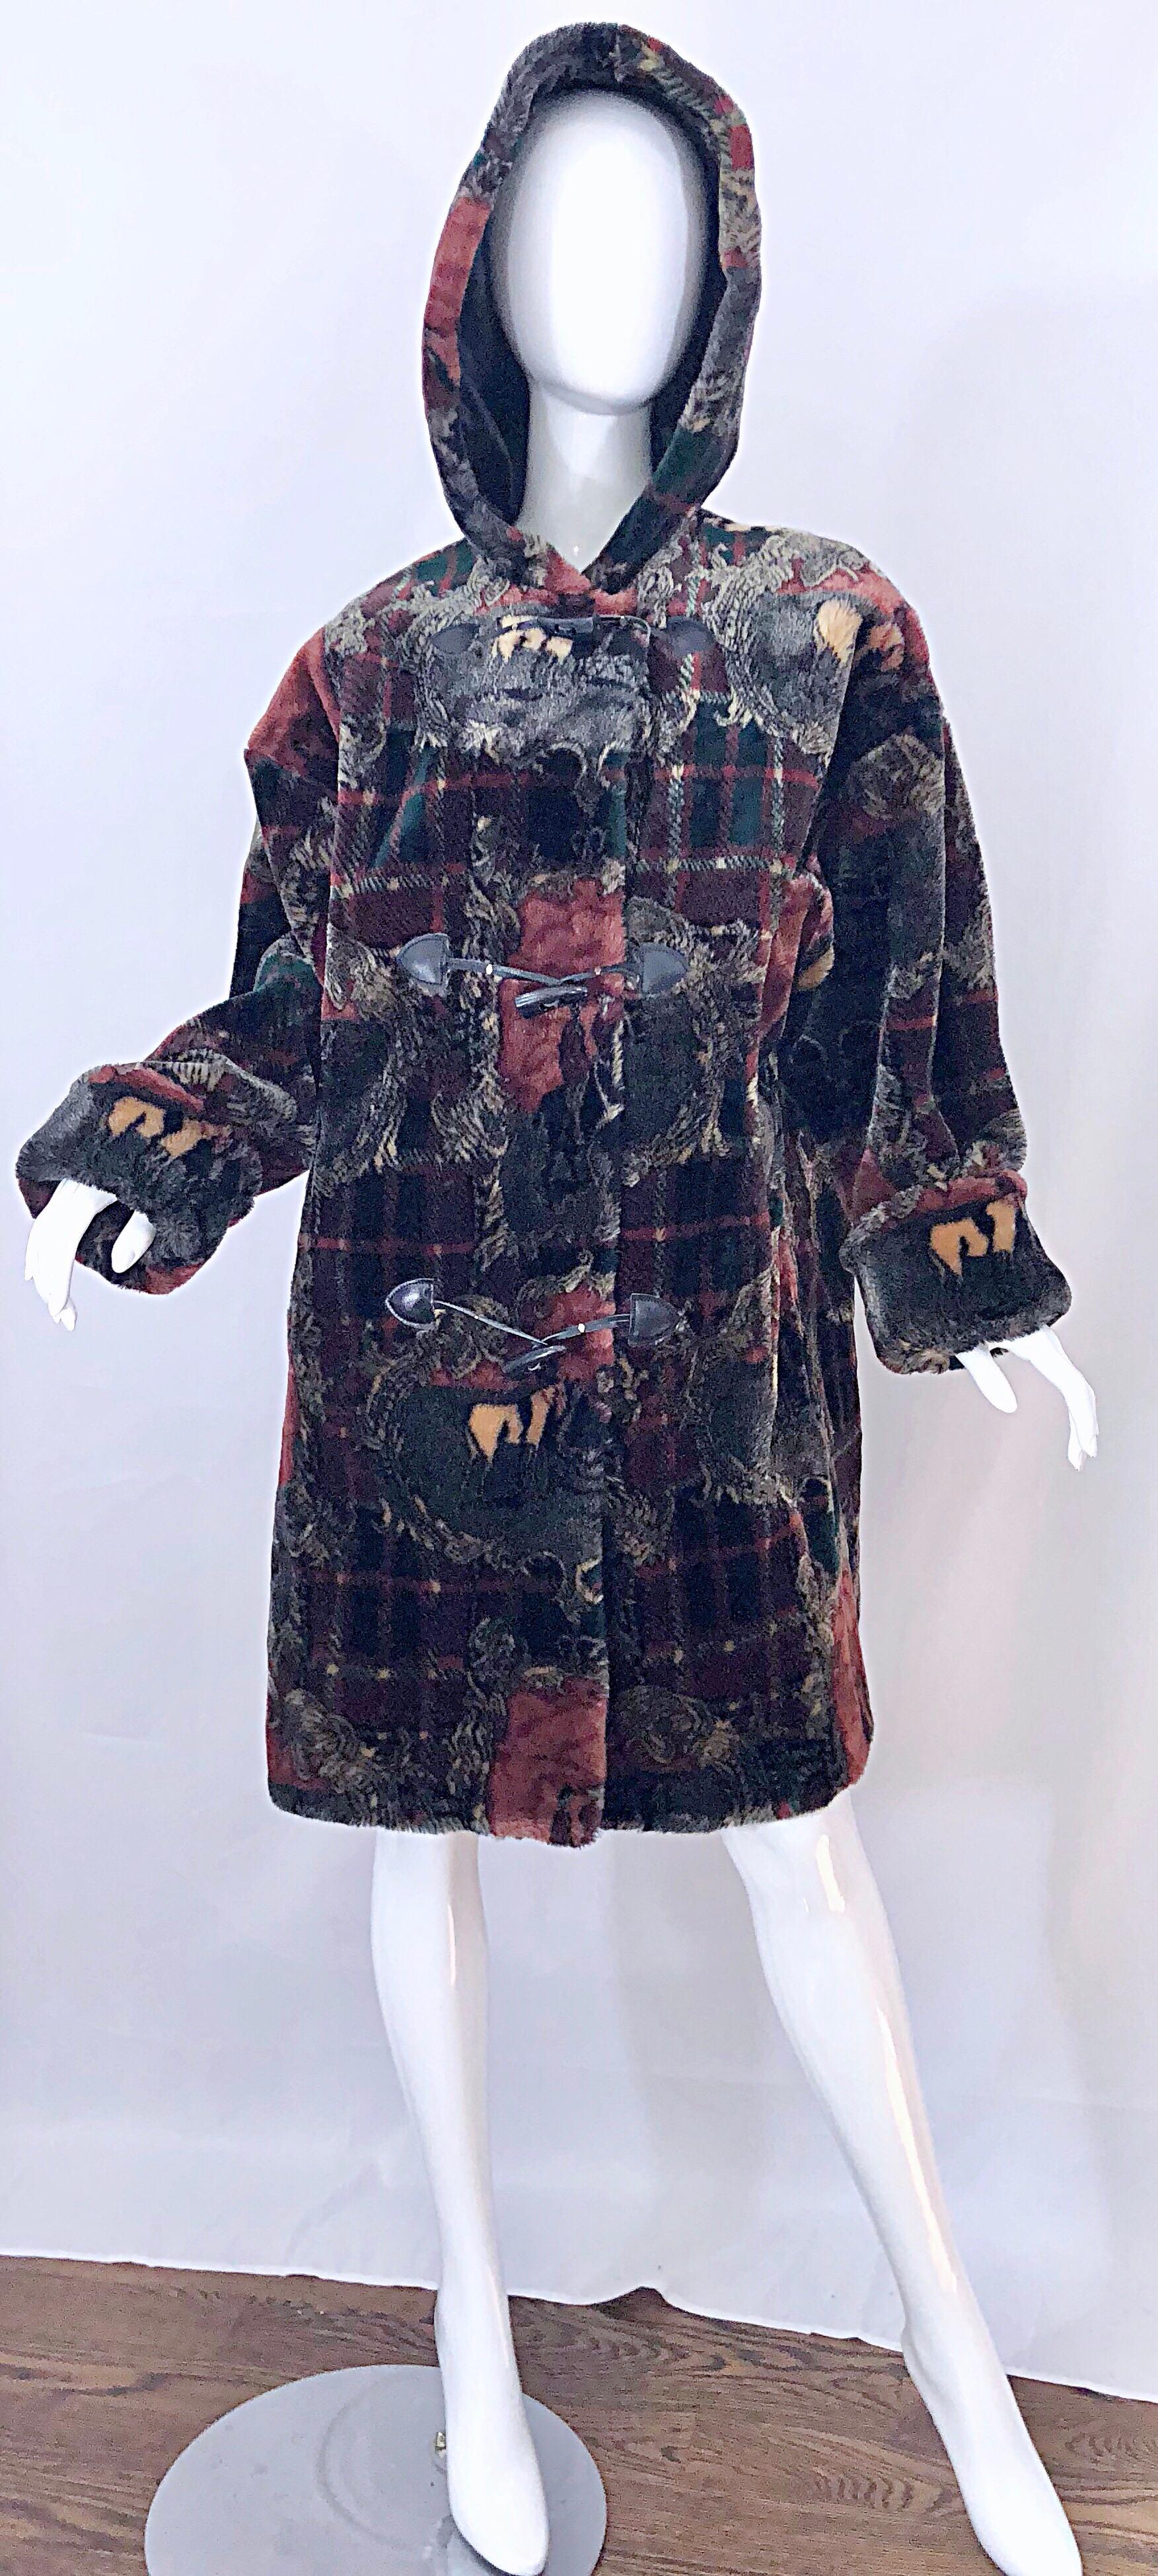 Amazing vintage Donnybrook equestrian print plaid oversized faux fur hooded jacket coat! Features horses and riders with tartan plaid throughout. Attached hood can be worn down or up for extra chilly weather. Pockets at each side of the hips. Toggle